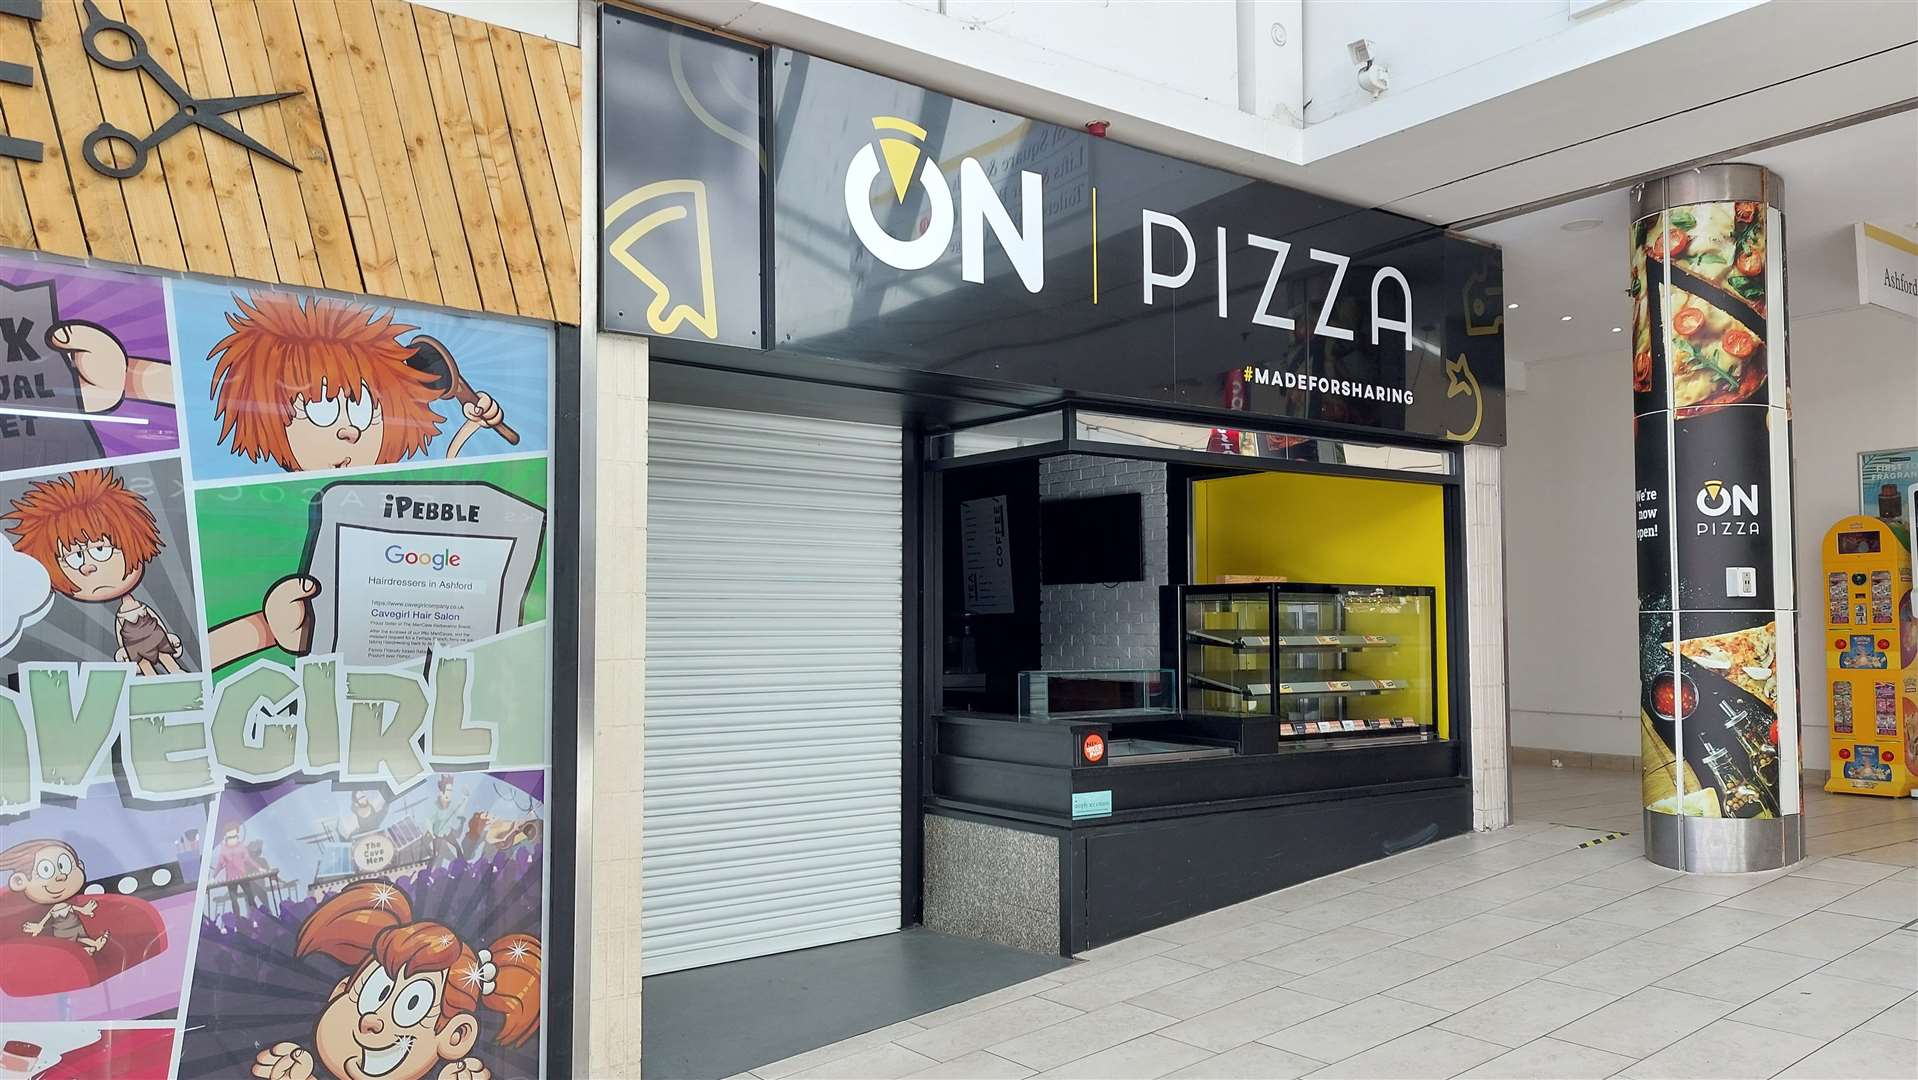 On Pizza was based by County Square’s Tufton Street entrance